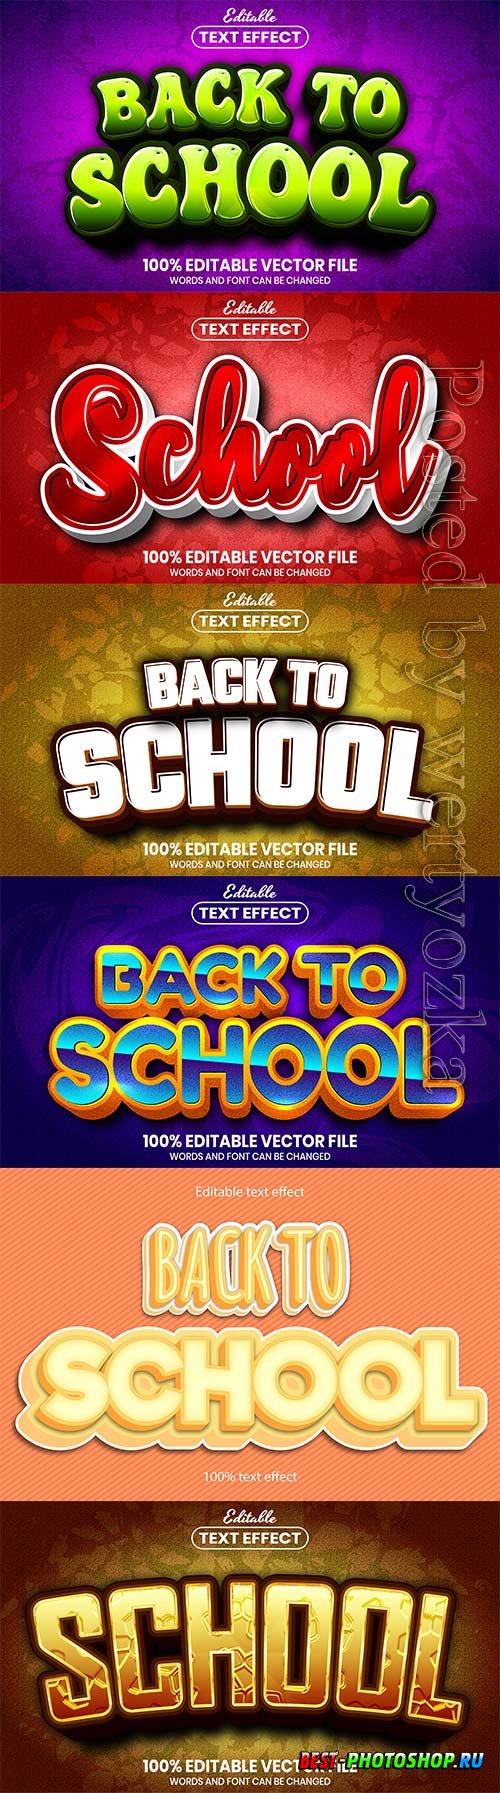 Back to school editable text effect vol 6